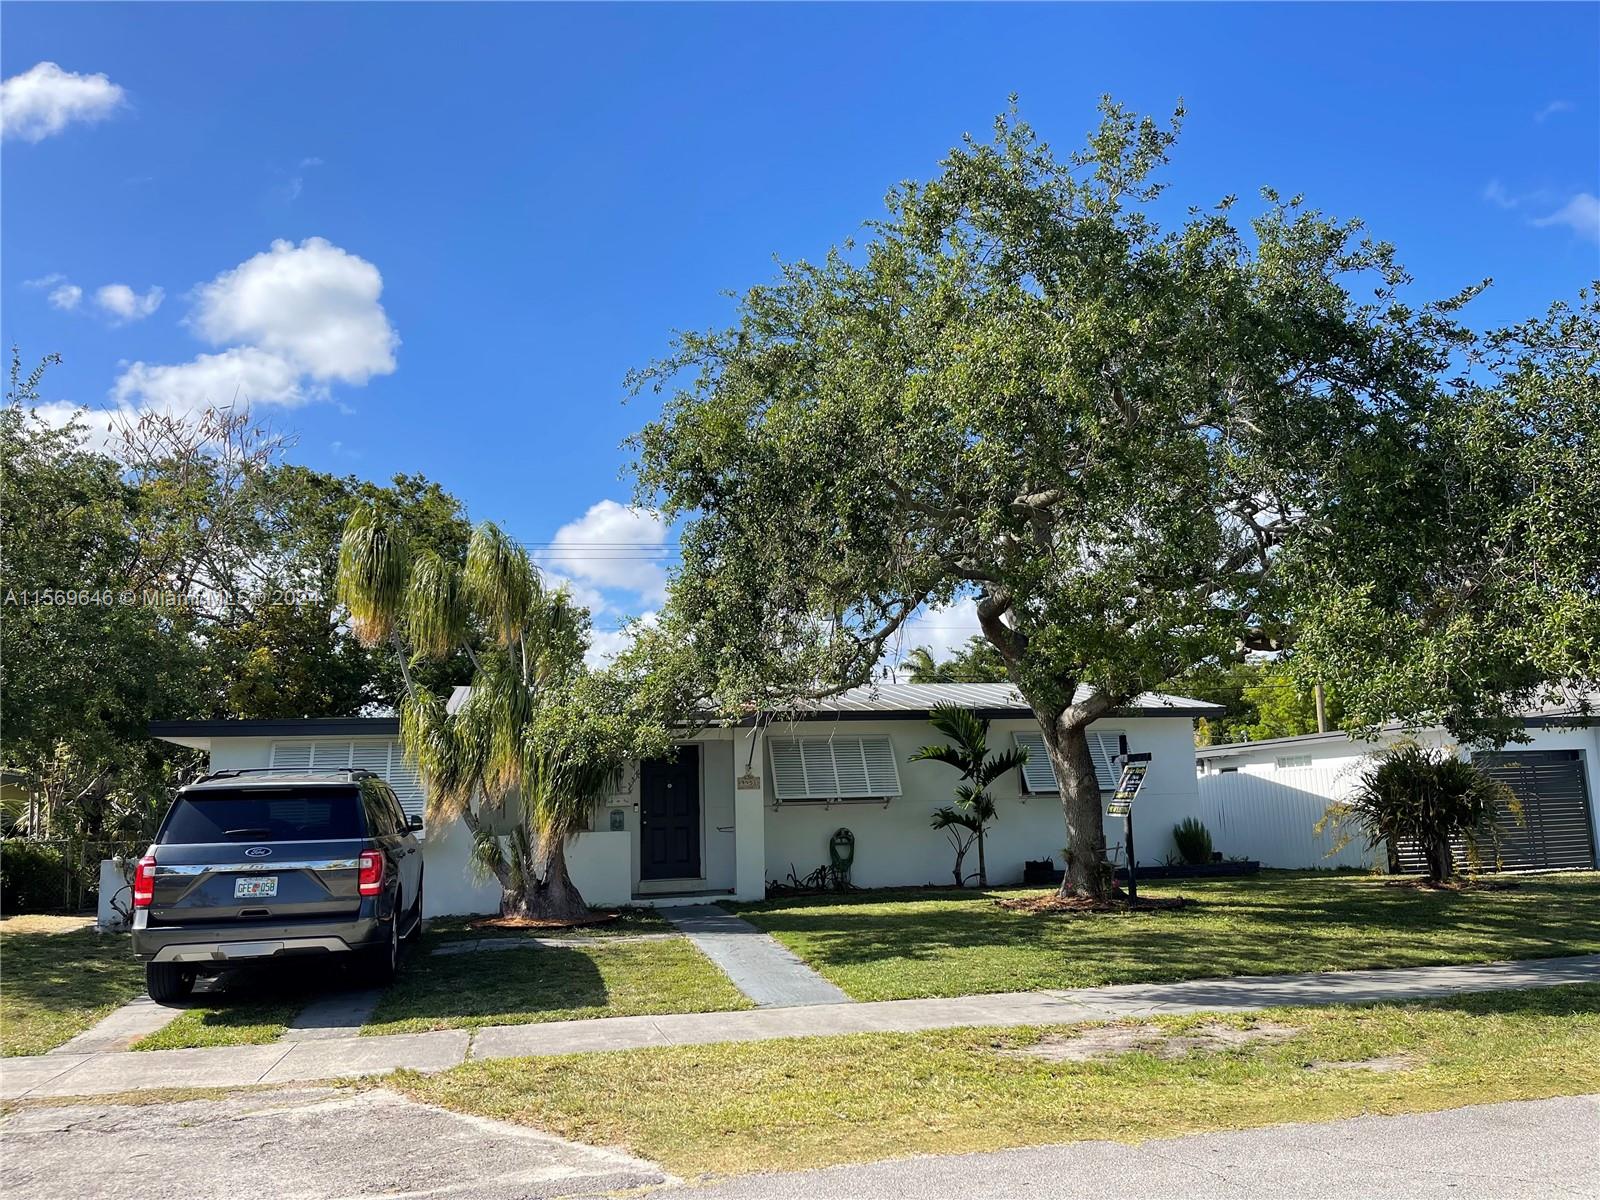 *** LOOKING FOR A HOME TO FIT A LARGE FAMILY OR NEED SPACE FOR YOUR IN-LAWS… LOOK NO FURTHER. THIS HOME HAS ALL THE SPACE YOU WILL NEED *** 6 BEDROOMS 2 BATH *** NEWER METAL ROOF *** VERY SPACIOUS LAYOUT WITH PLENTY OF NATURAL LIGHT *** ROOM FOR A BOAT *** LOCATED ON QUIET TREE-LINED STREET IN DESIRABLE CUTLER BAY *** OUR COMMUNITY HAS MANY FAMILY EVENTS LIKE GOLF CART PARADES, CHILI COOK OFFS, WING FESTS PLUS MUCH MORE *** CLOSE TO SHOPPING, TURNPIKE, AND POPULAR BLACK POINT MARINA *** BRING YOUR OFFERS AND START ENJOYING SOUTH FLORIDA LIVING ***